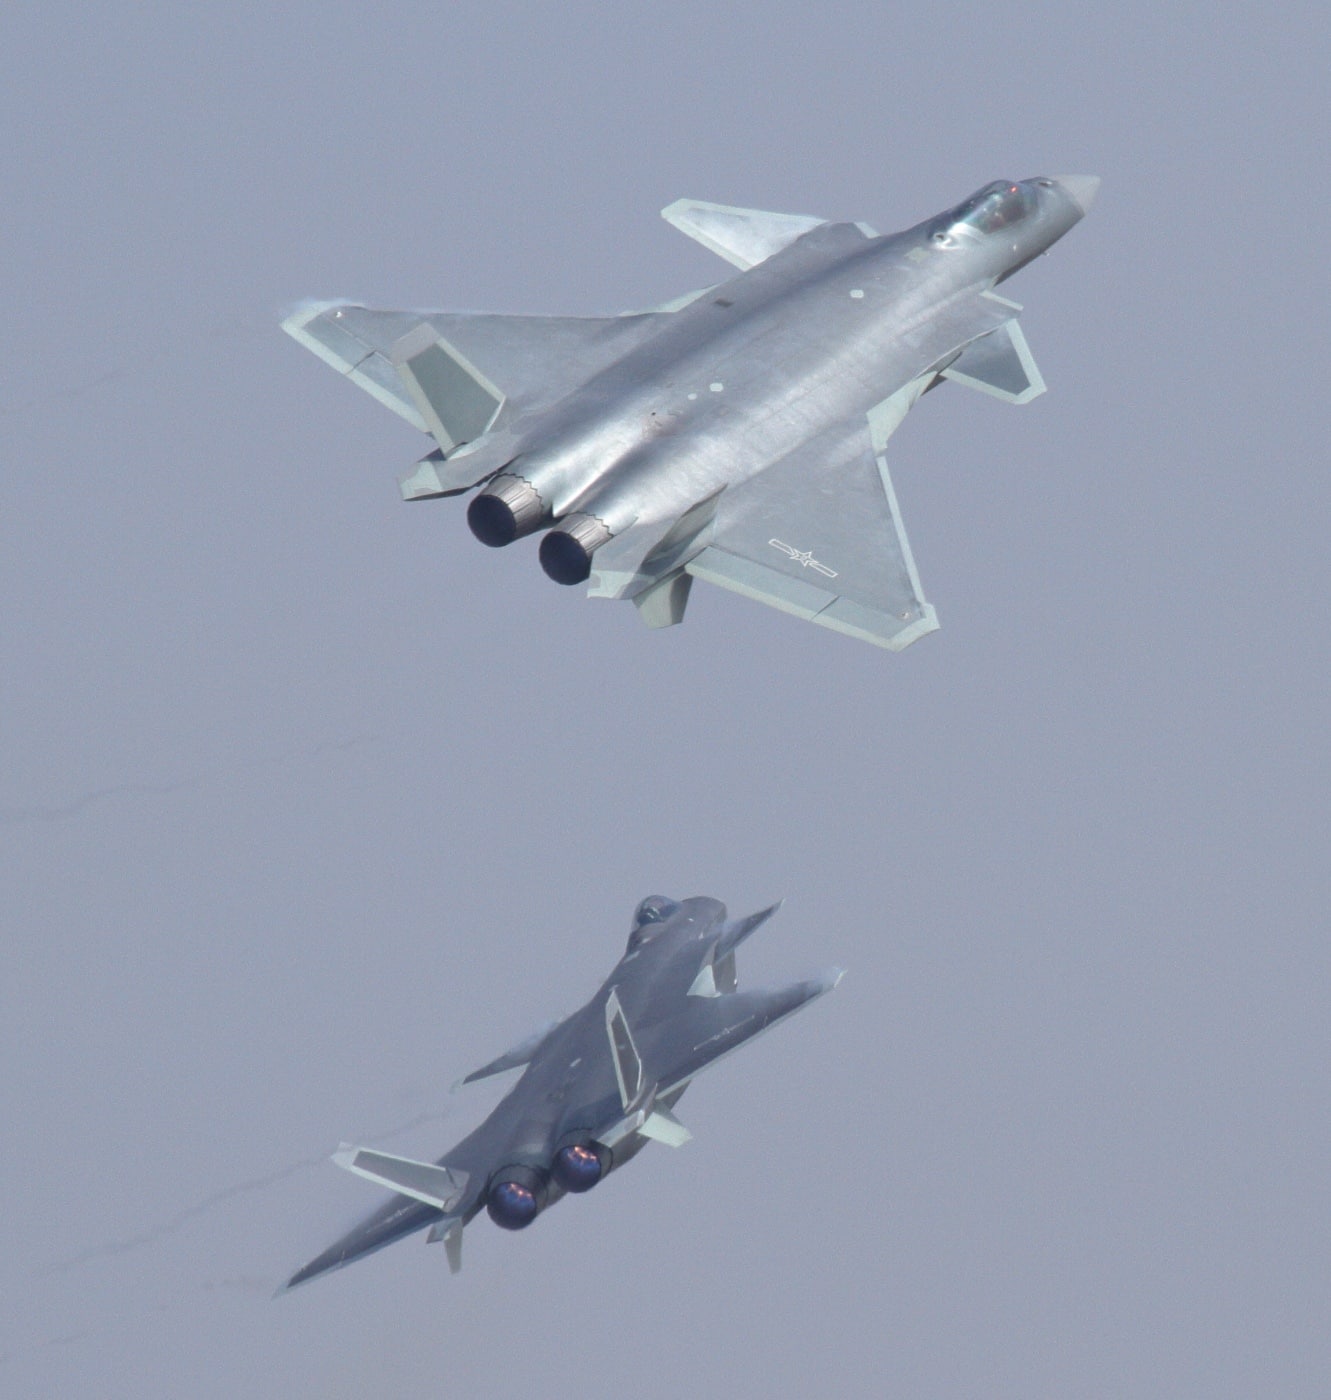 a pair of j-20 stealth fighters